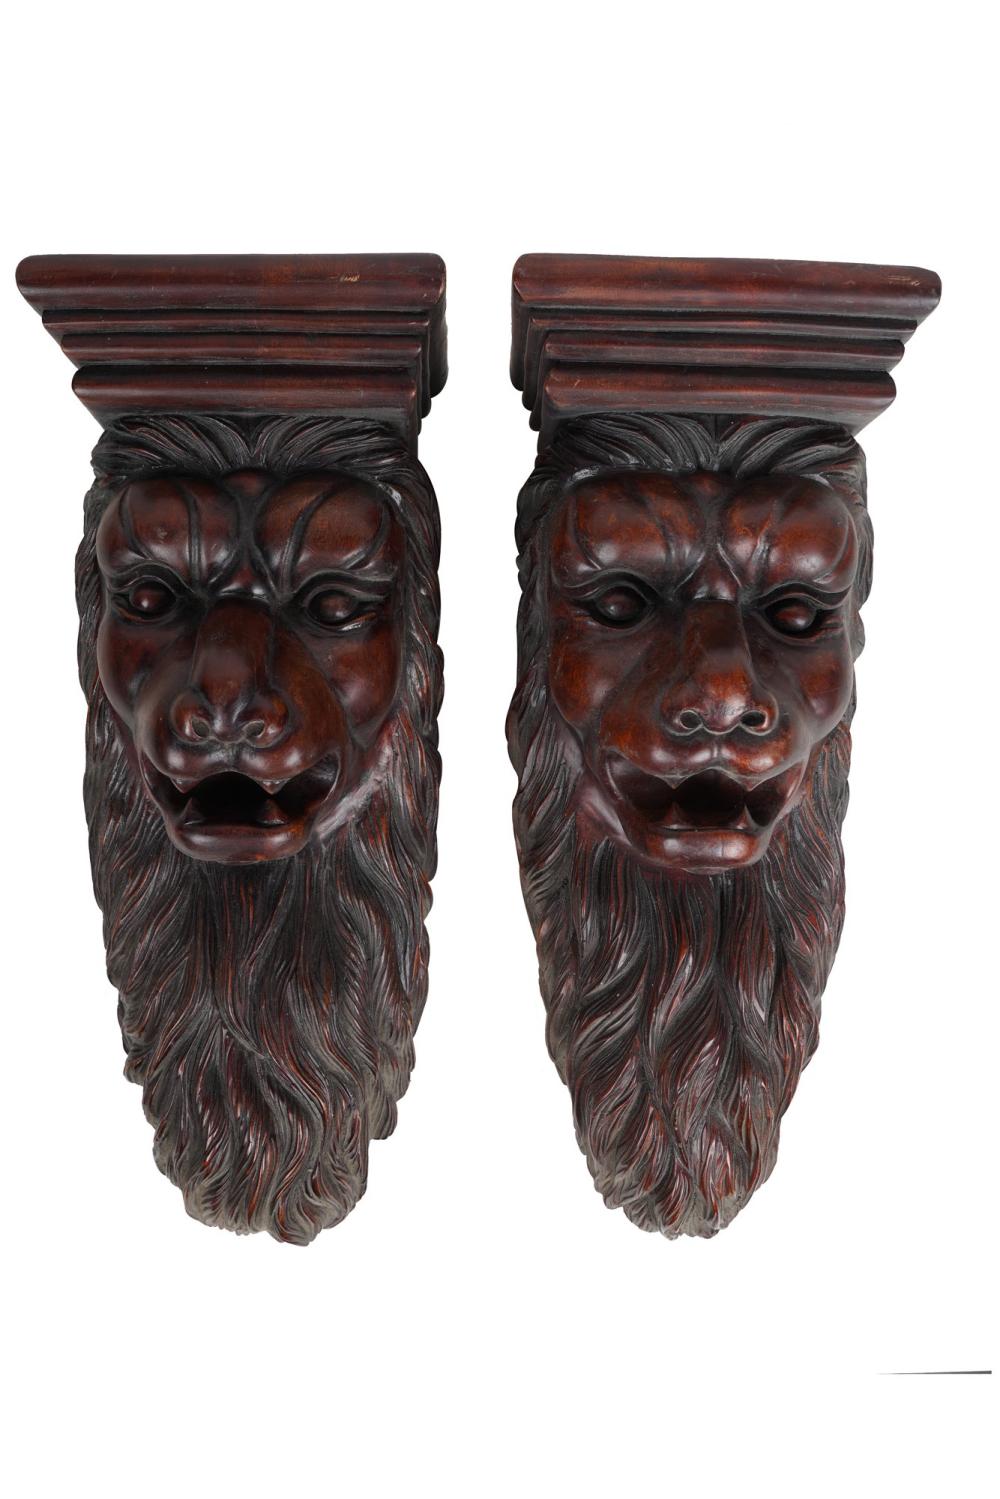 PAIR OF CARVED WOOD LION BRACKETSCondition: